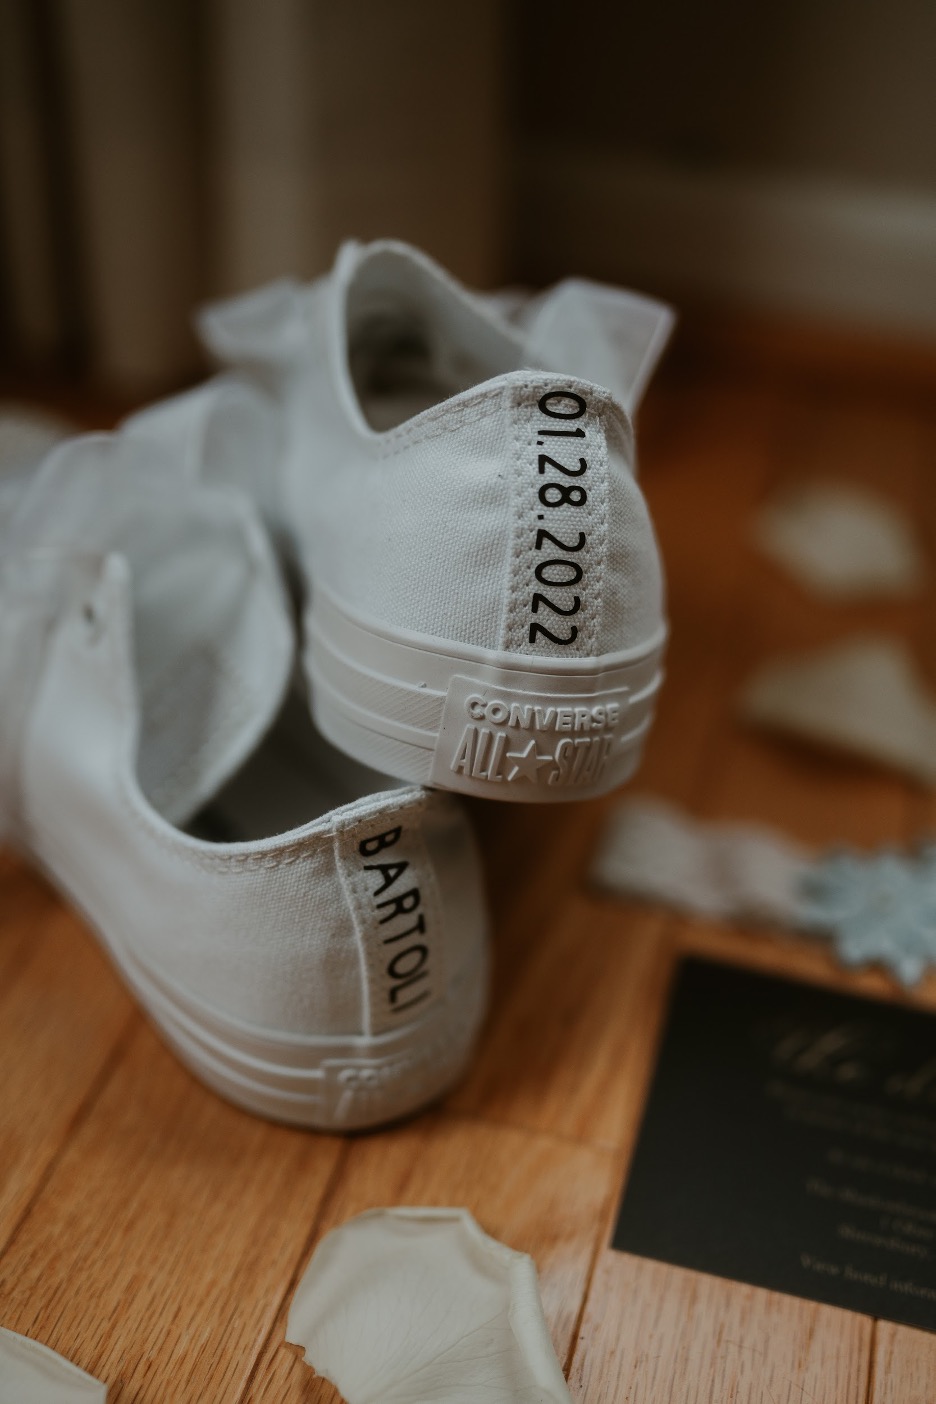 The back of the bride's white sneakers features her new last name and their wedding date.